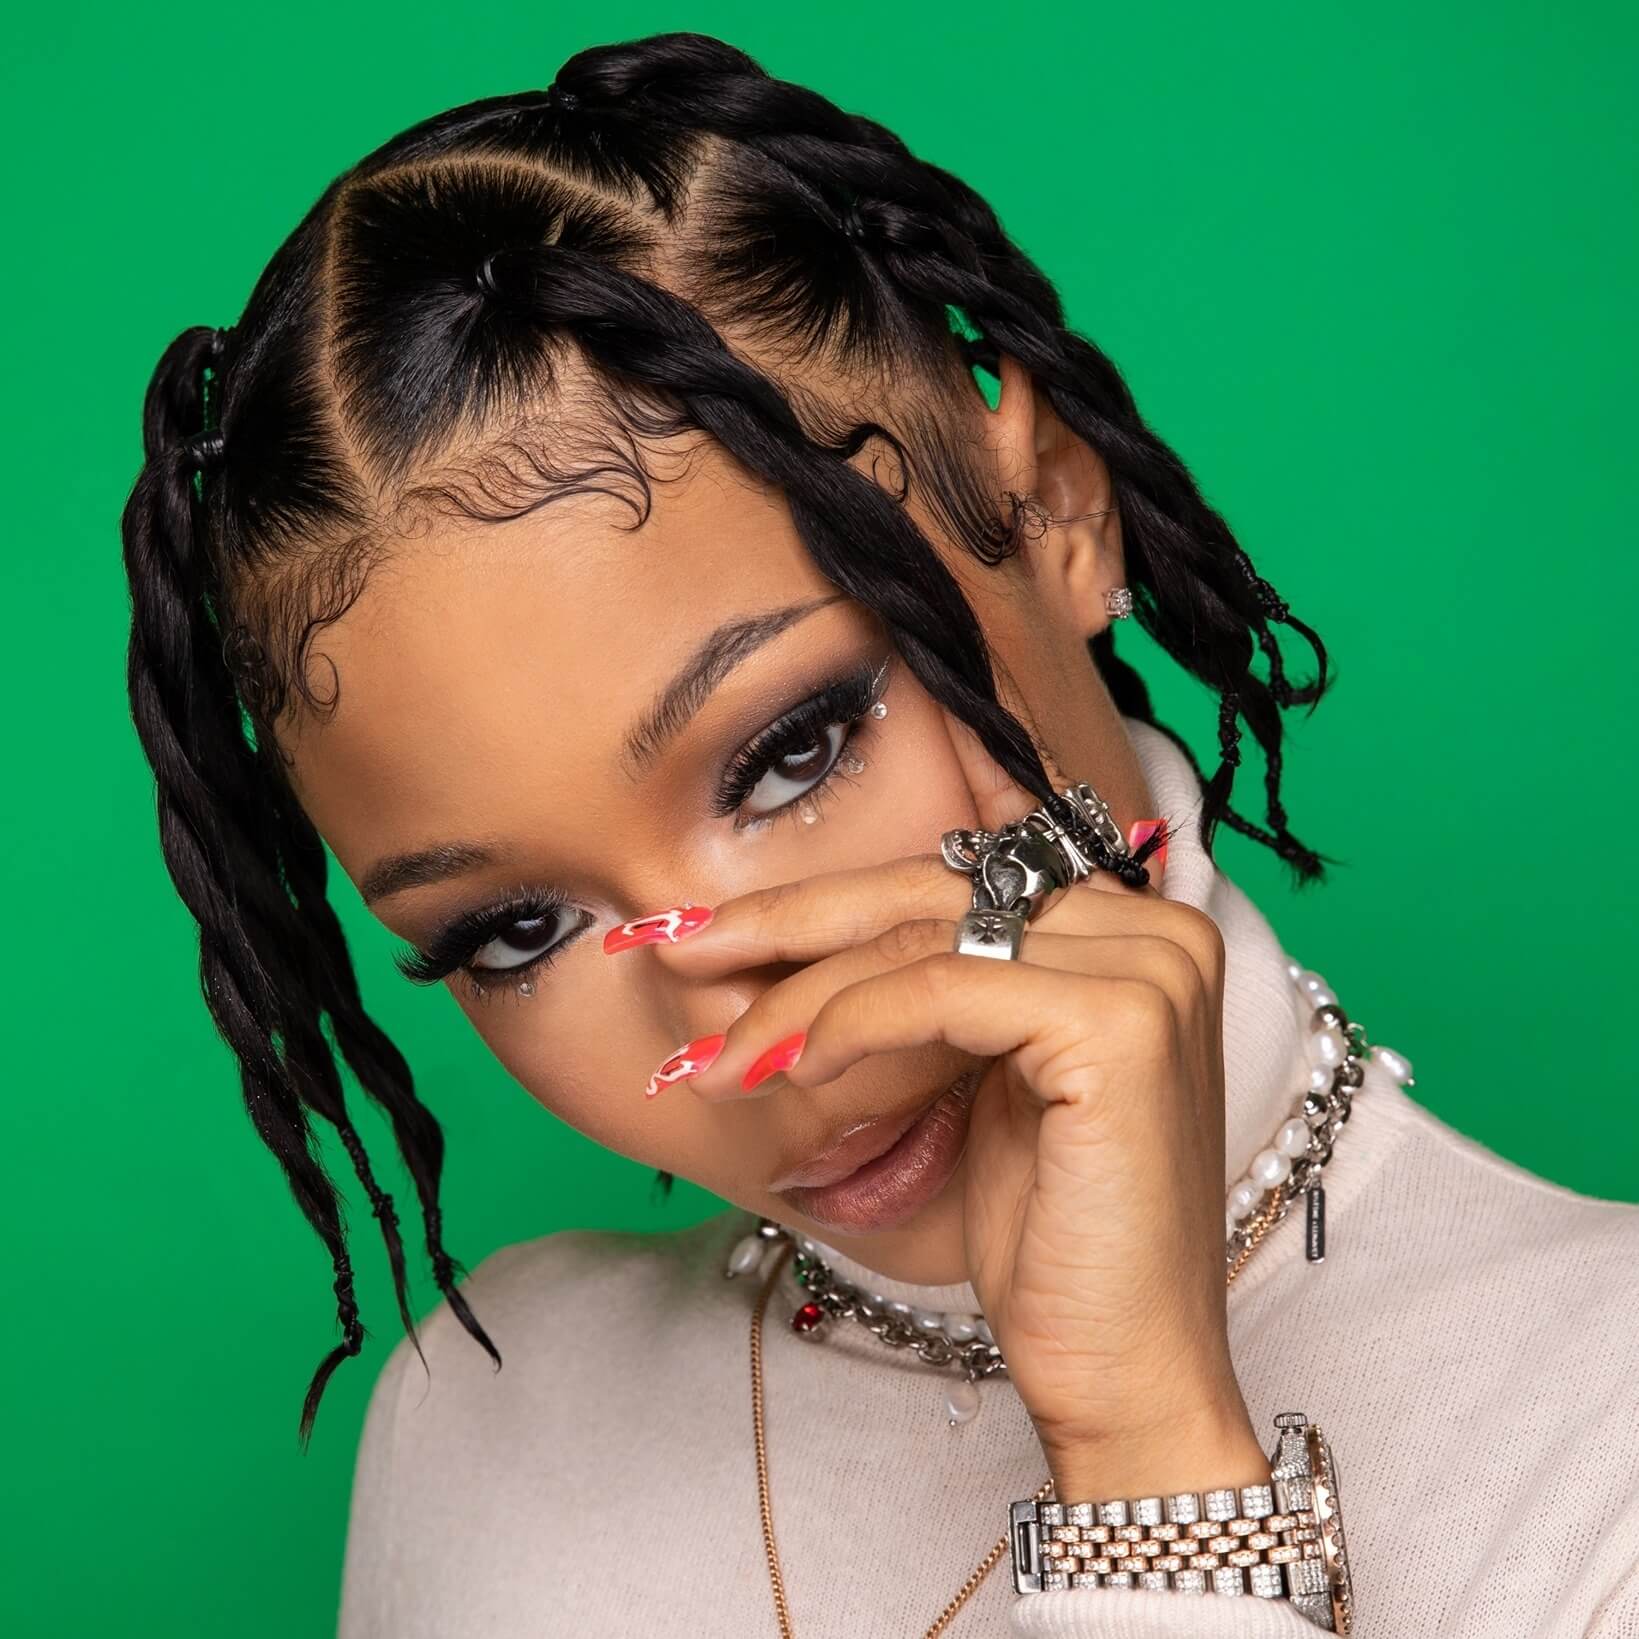 Coi Leray - Biography, Age, Songs, Net Worth & Pictures - 360dopes.